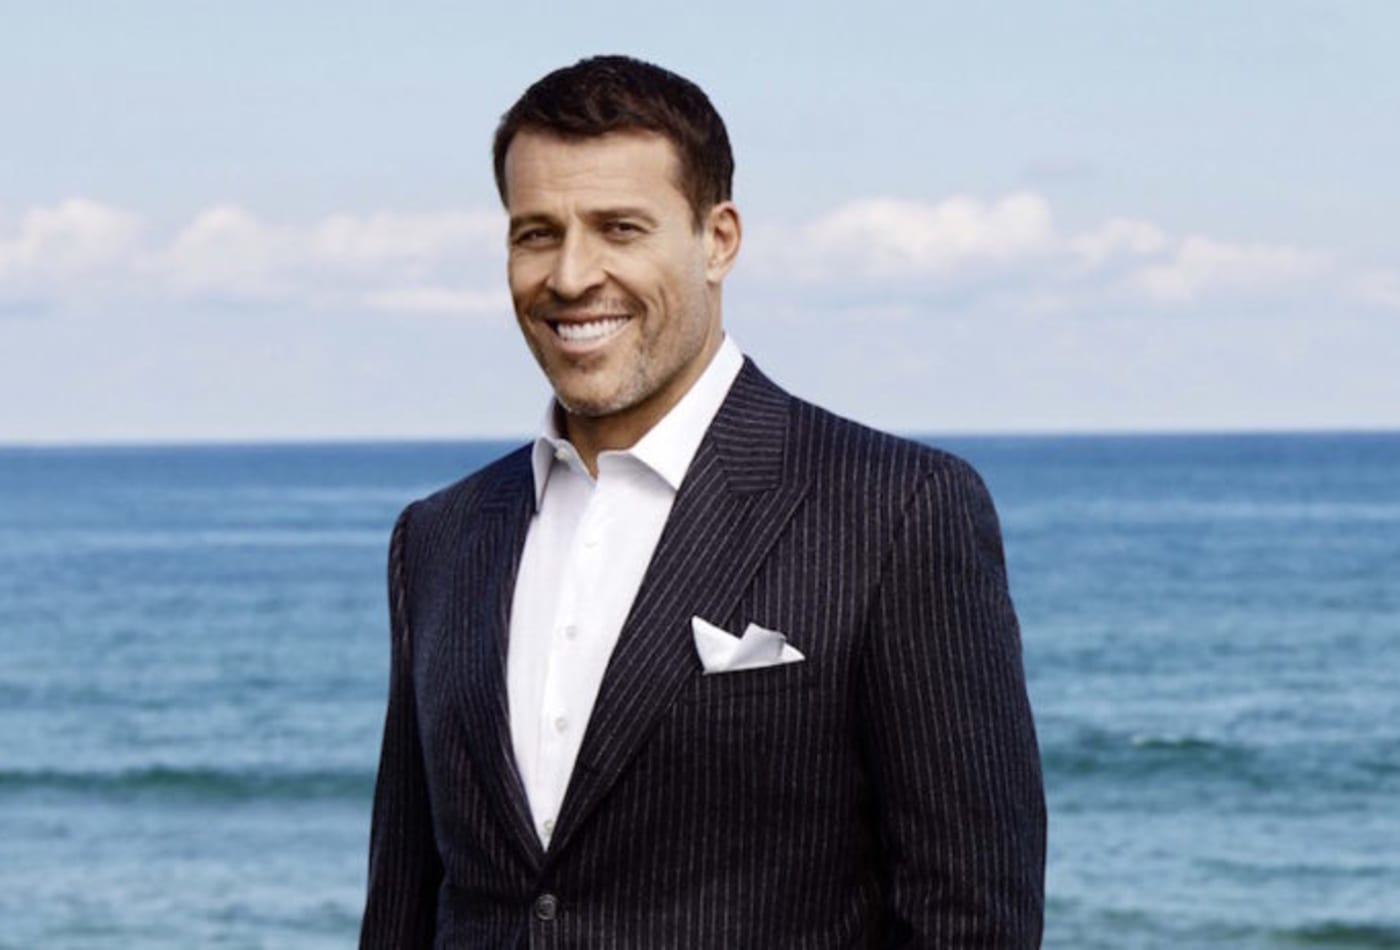 Tony Robbins: 4 Traits the Most Financially Successful People Share